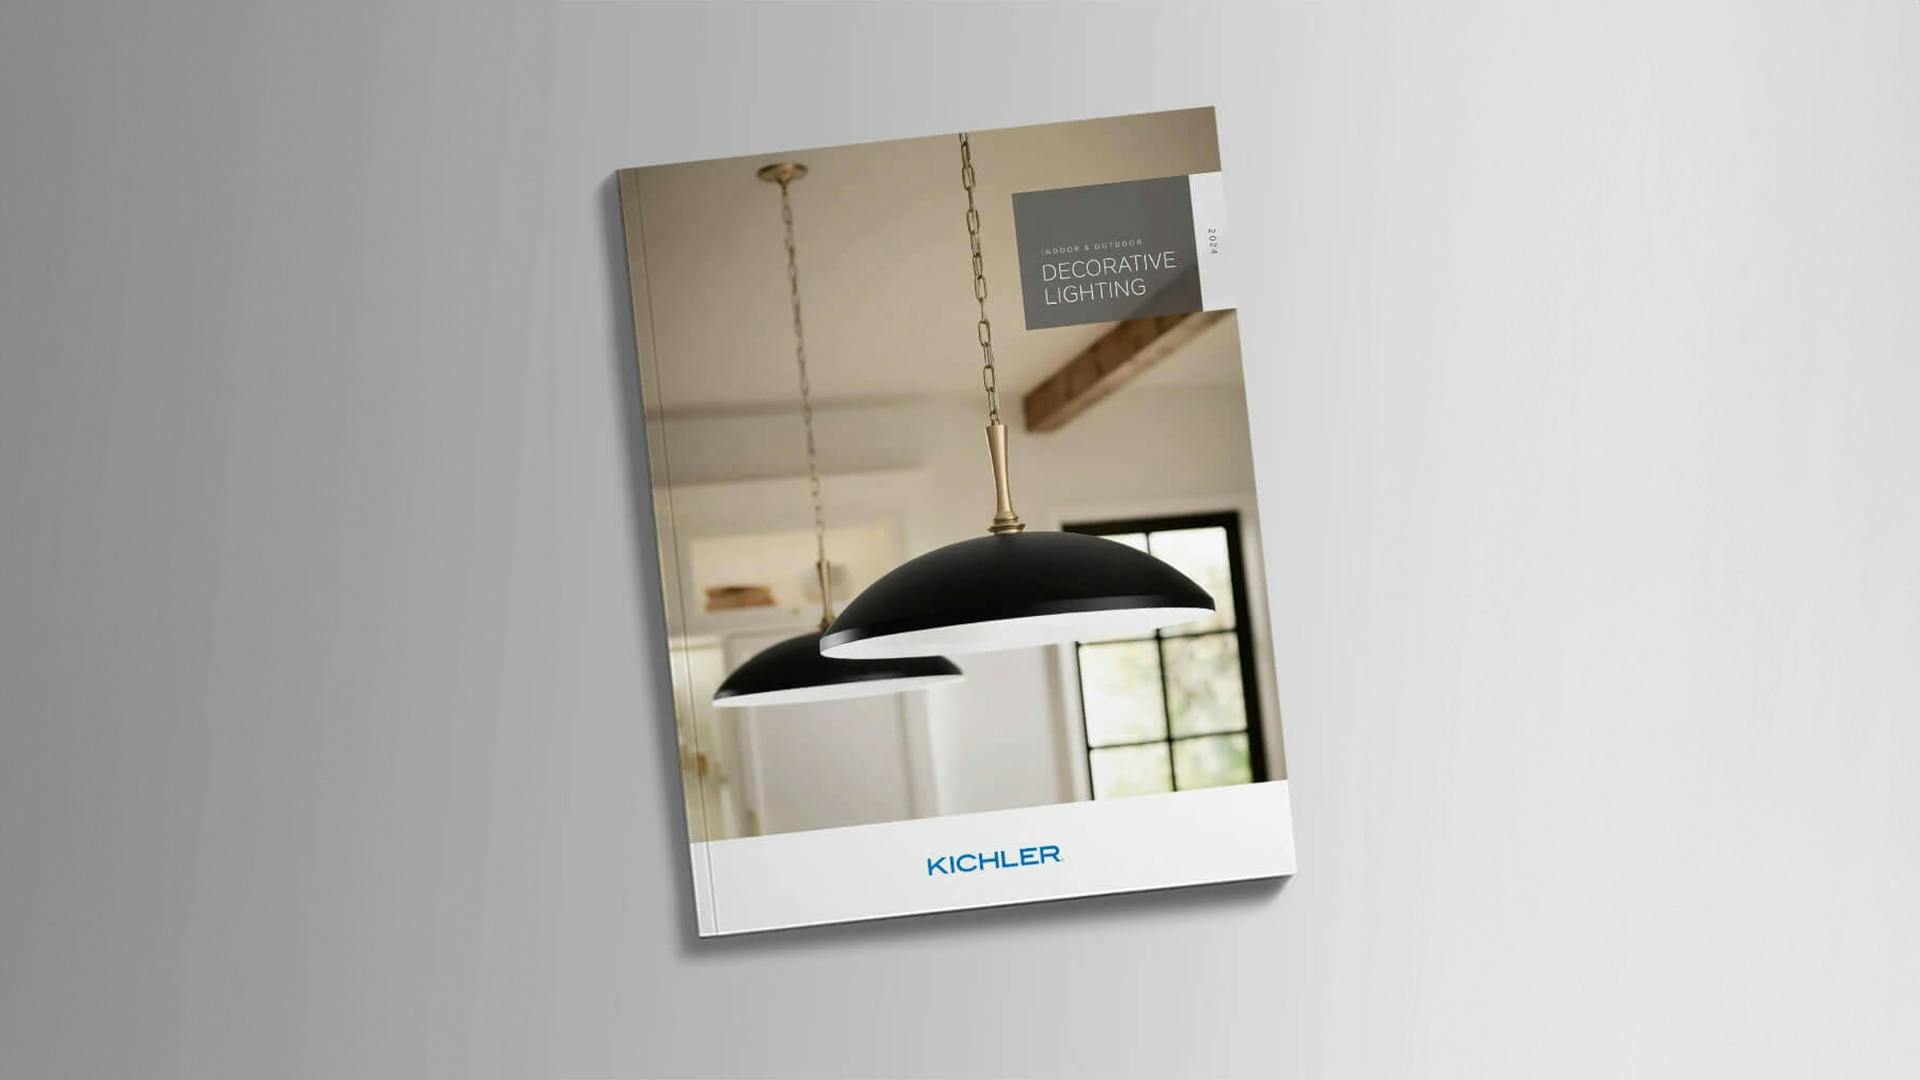 Catalog with a pendant light on the front and titled decorative lighting